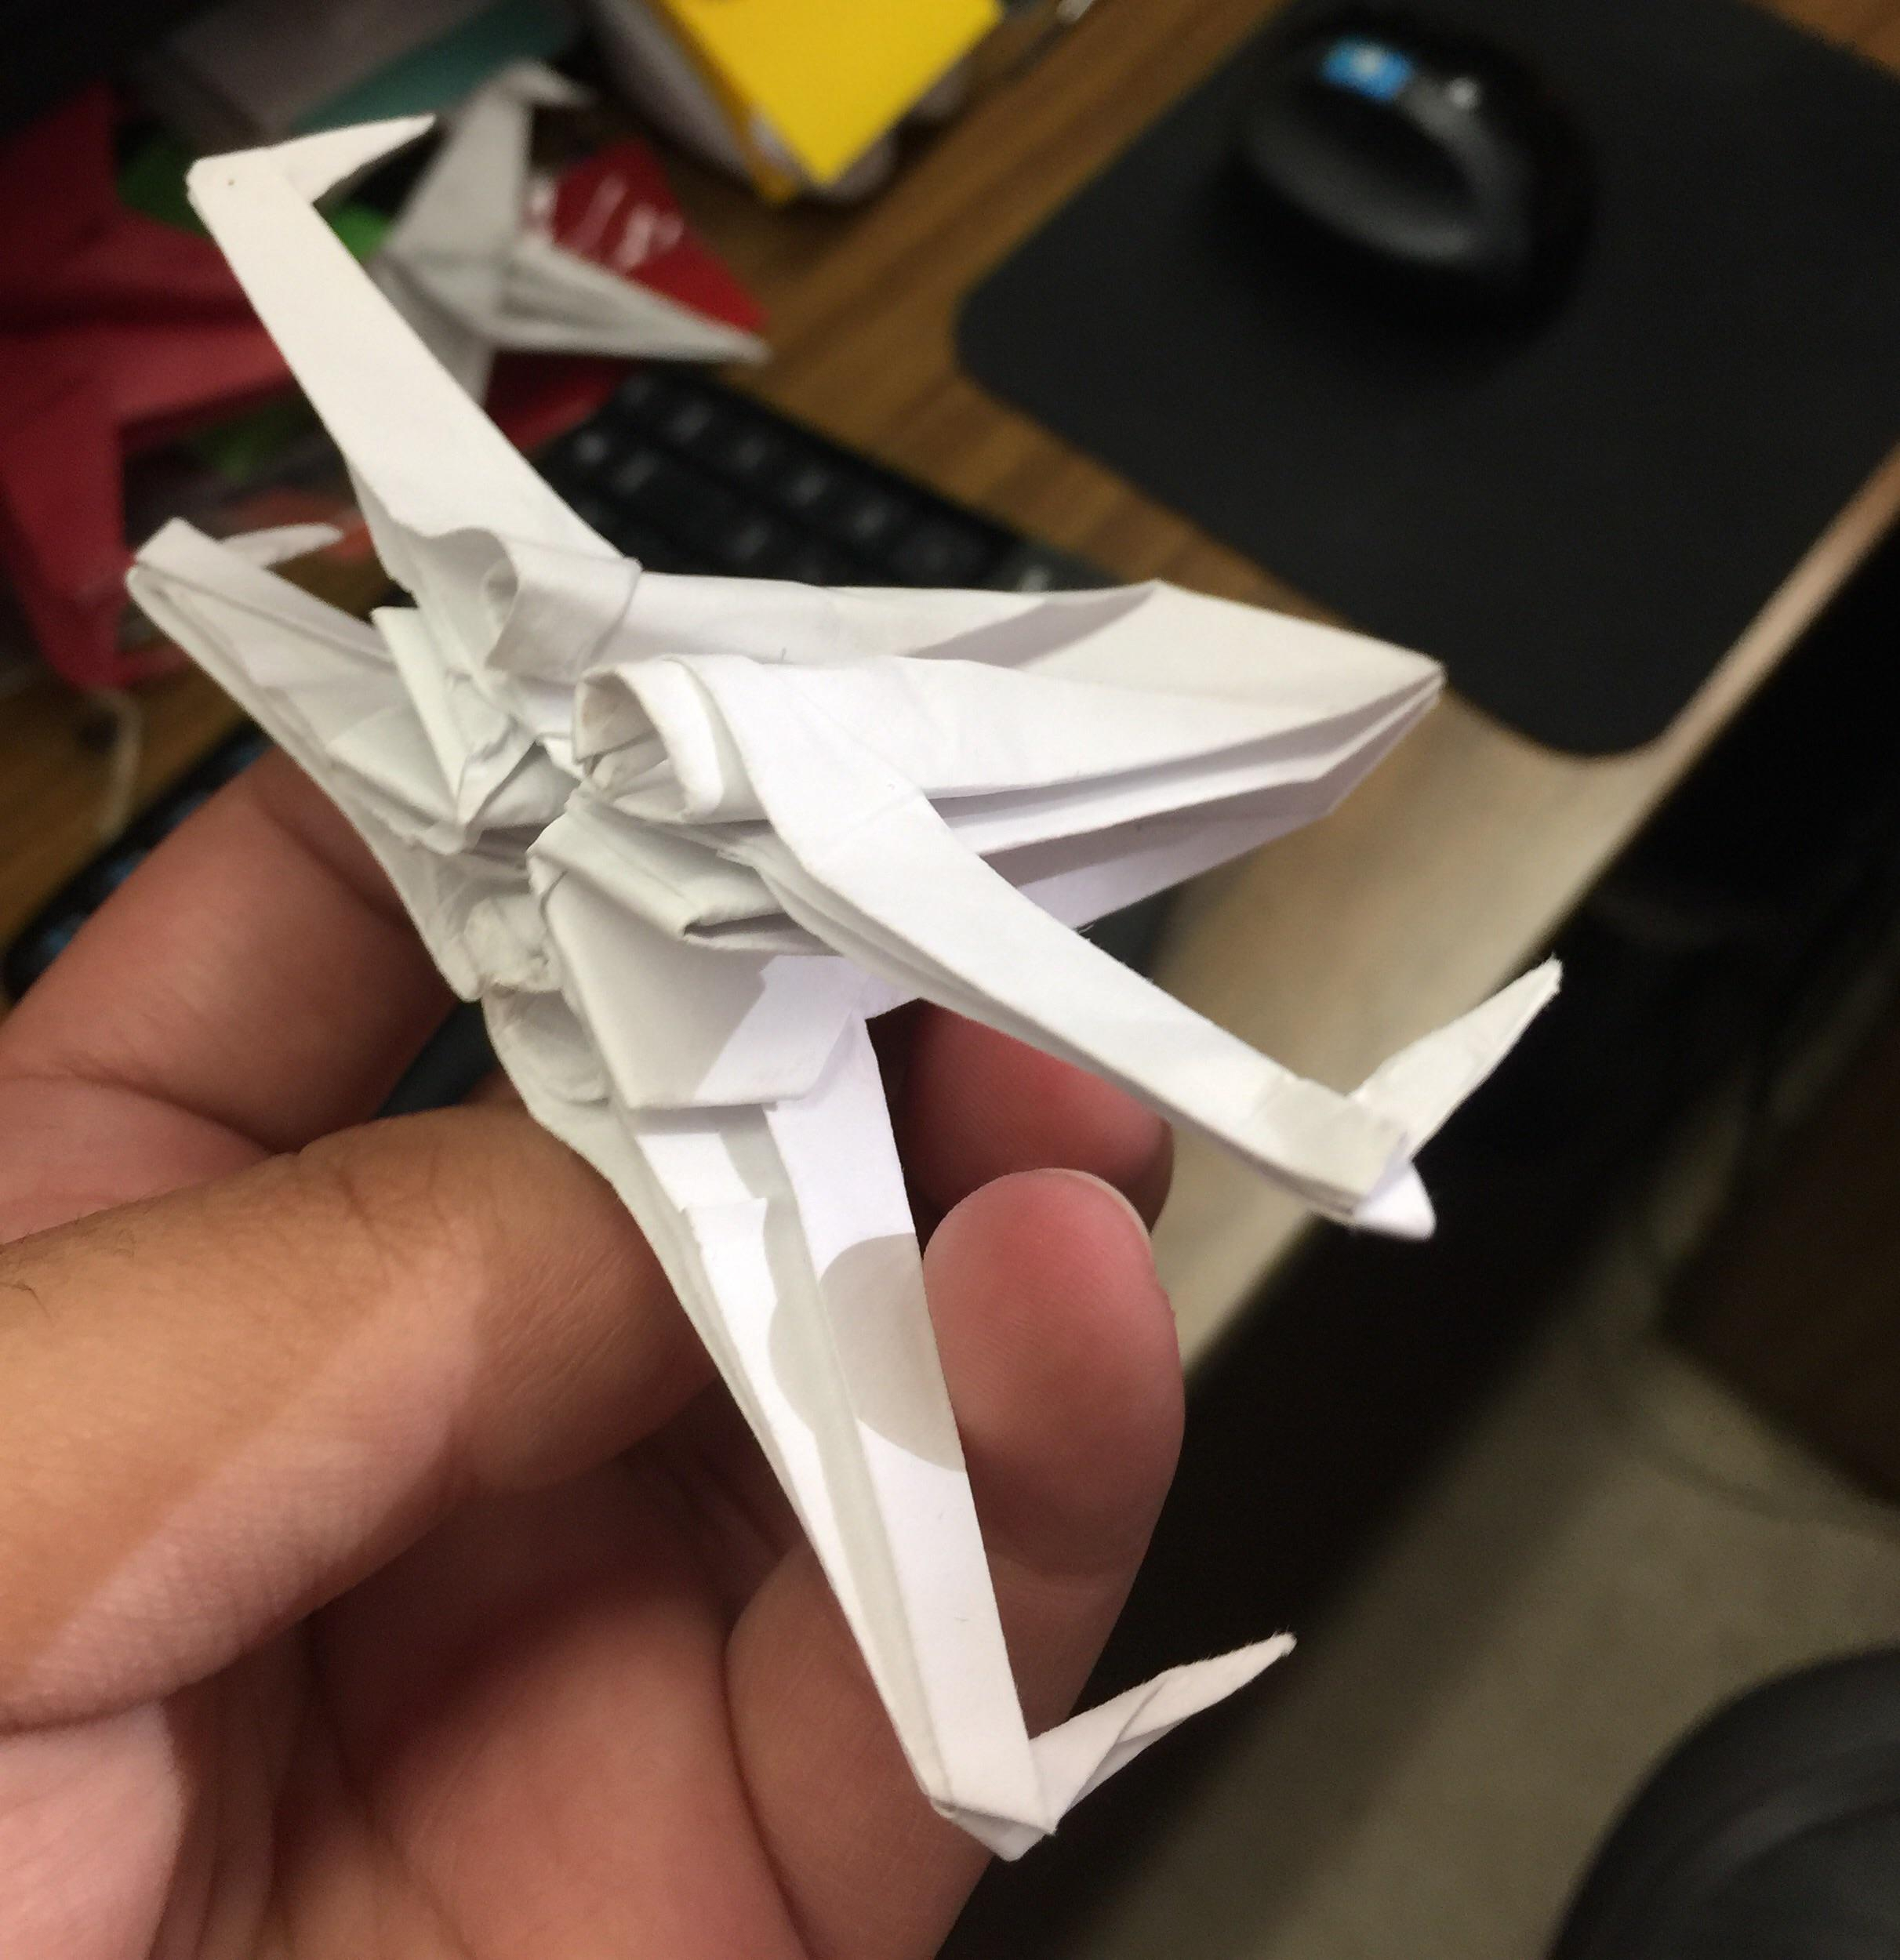 Star Wars X Wing Origami Origami X Wing A Person From My Work Made This I Thought It Looked